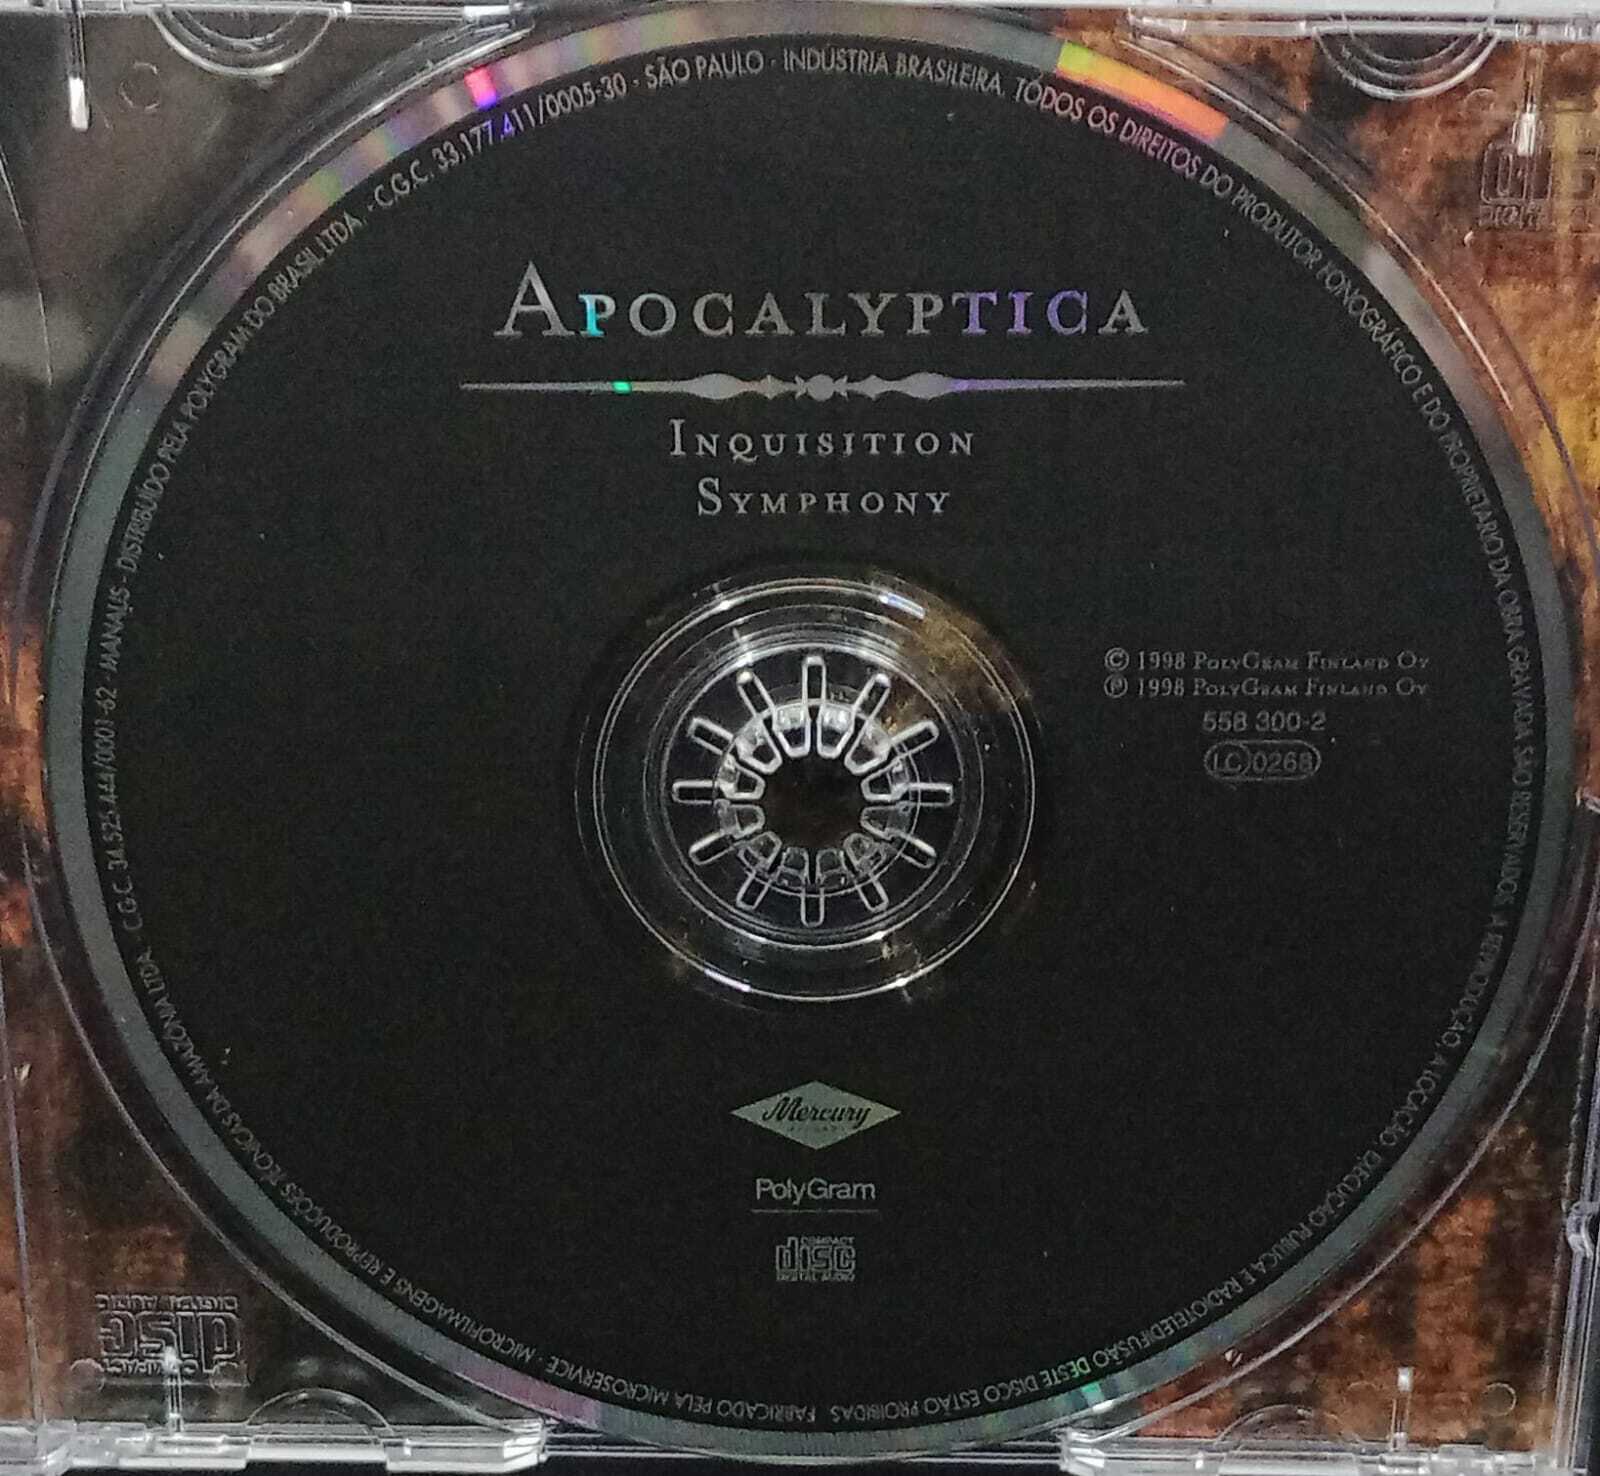 CD - Apocalyptica - Inquisition Symphony